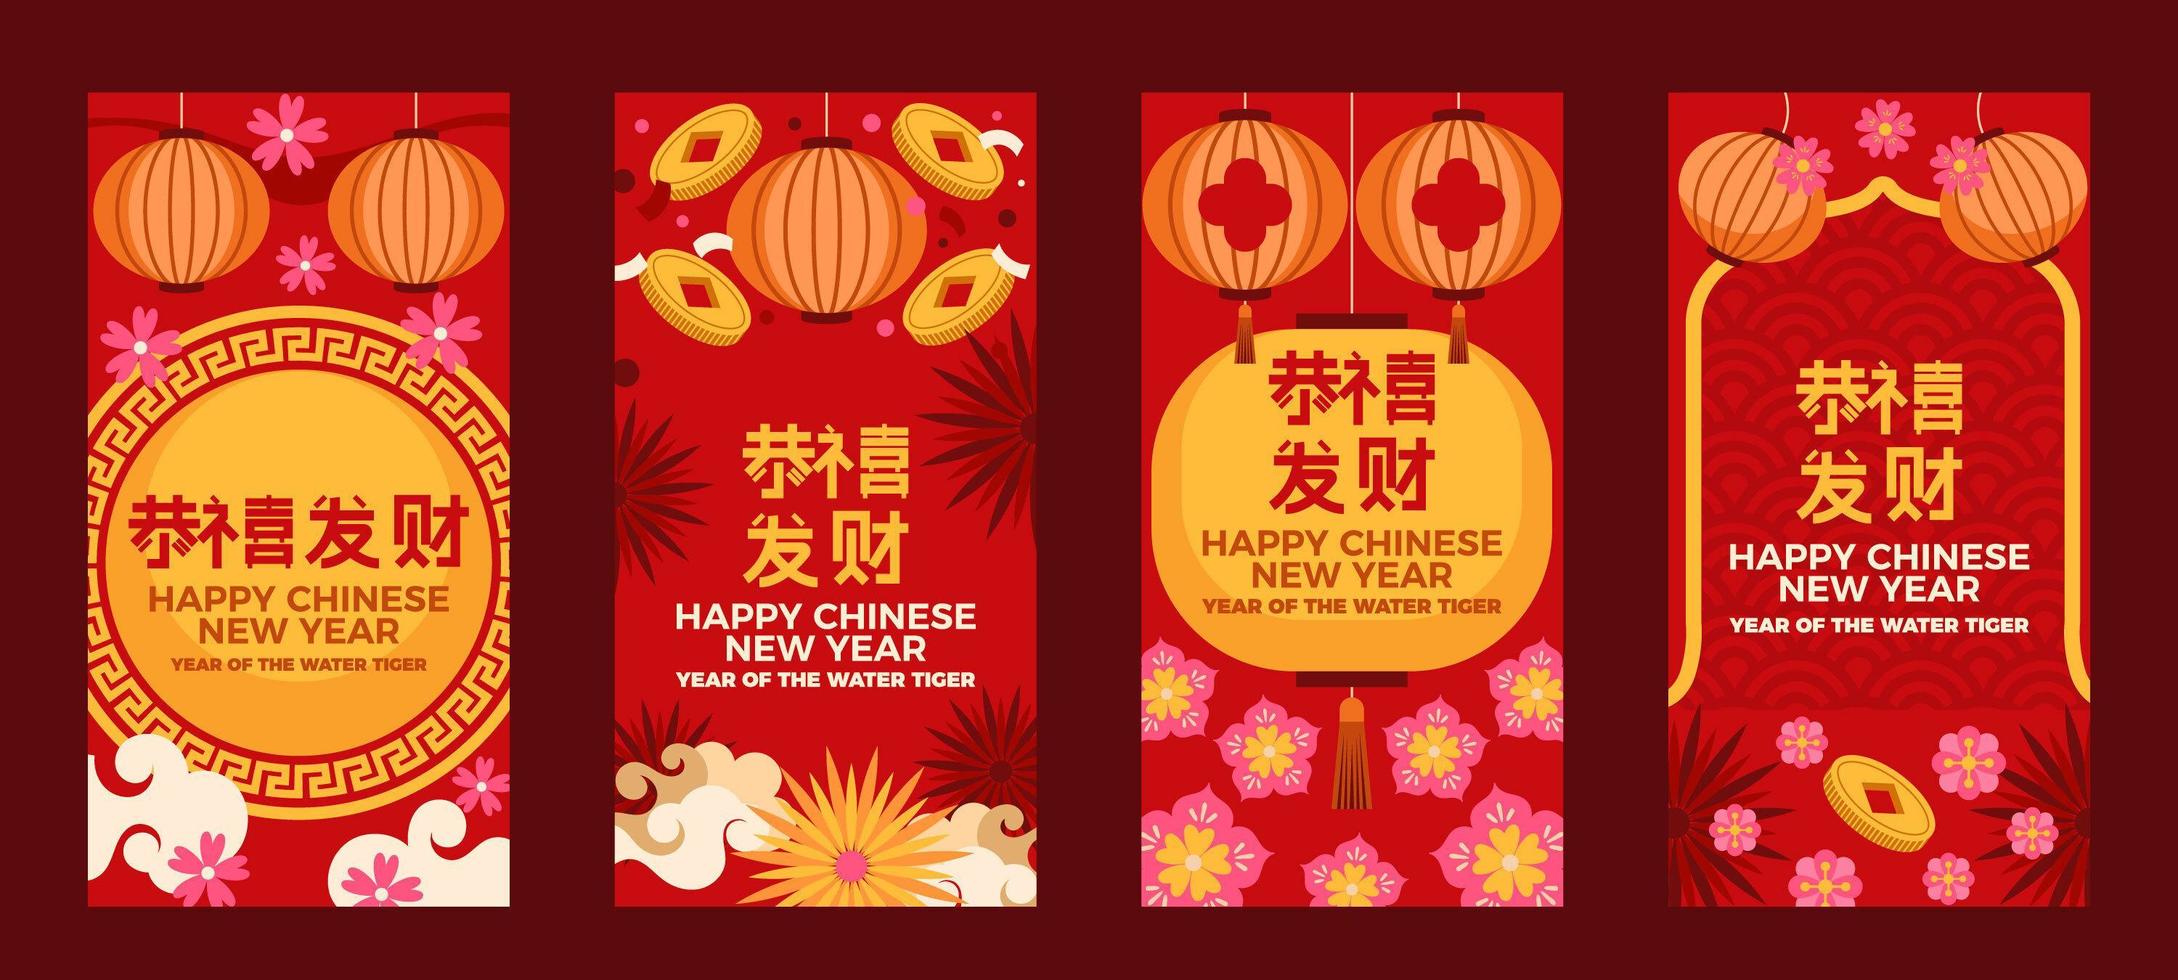 Social Media Story Post for Chinese New Year vector